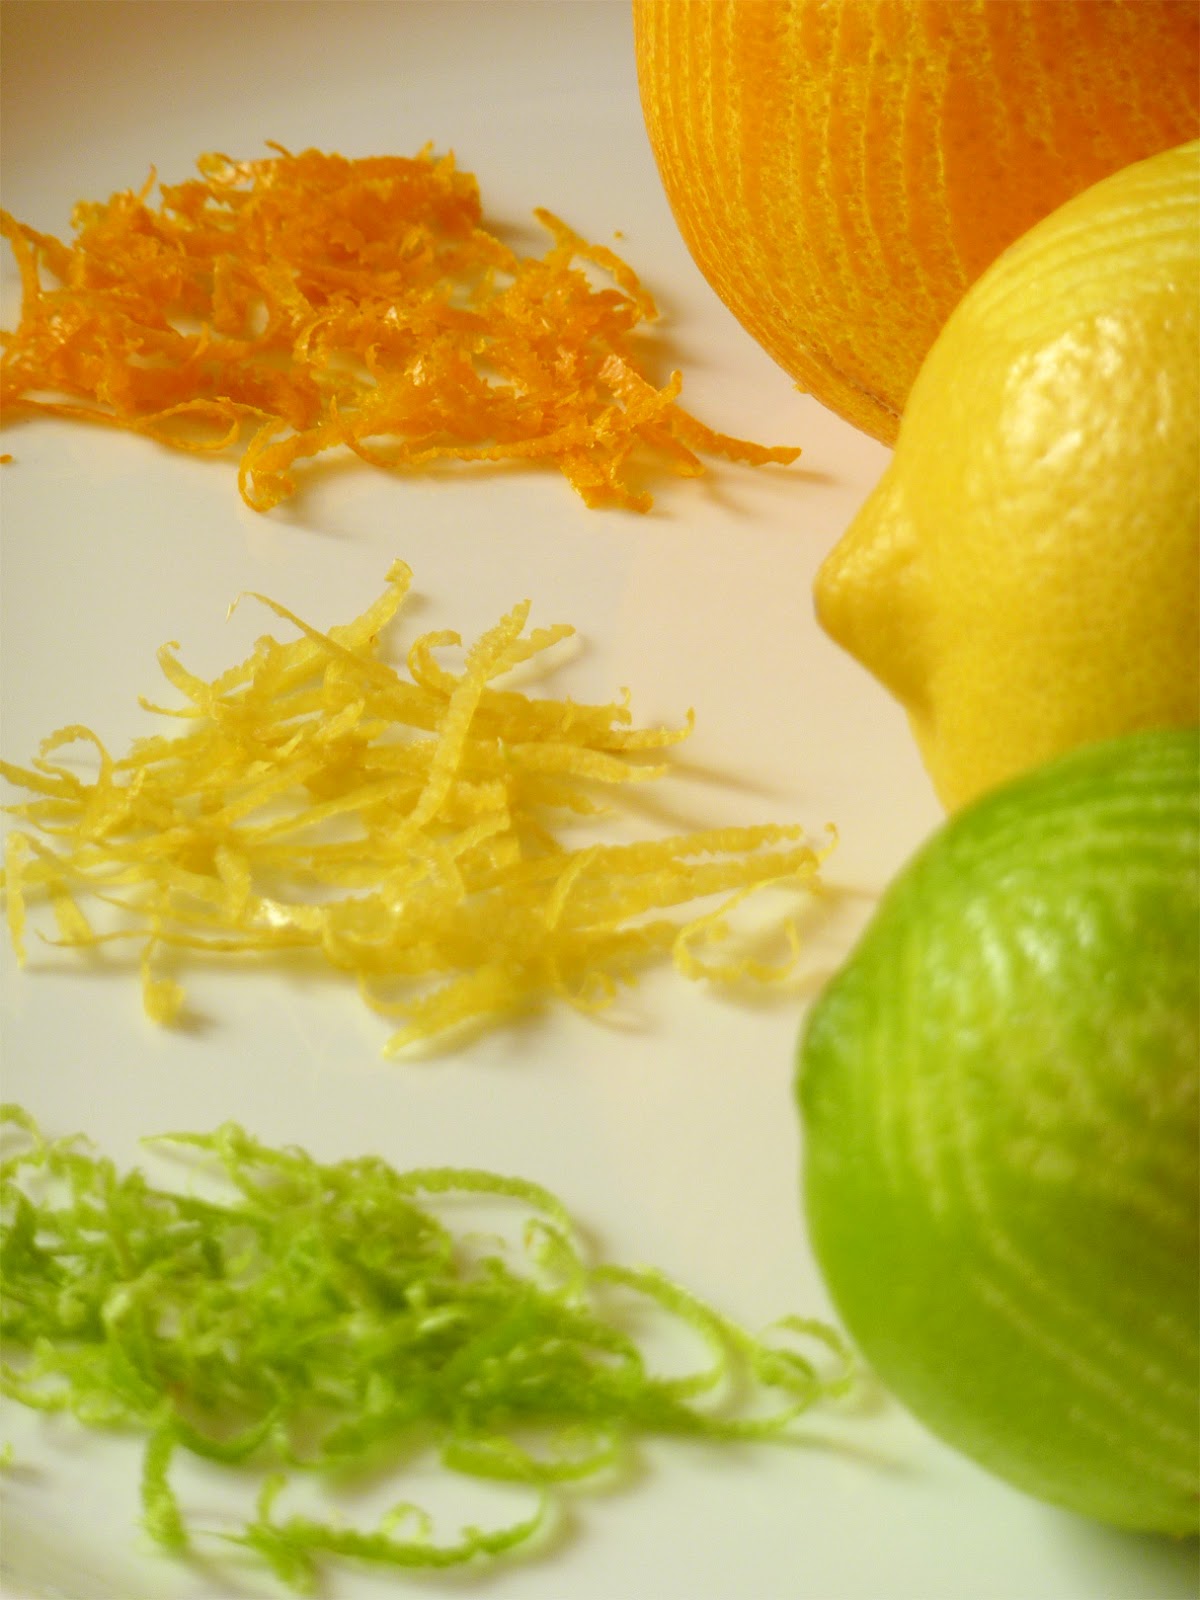 Pooka's What's for Dinner: How to Dry a Lemon, Lime or Orange Zest